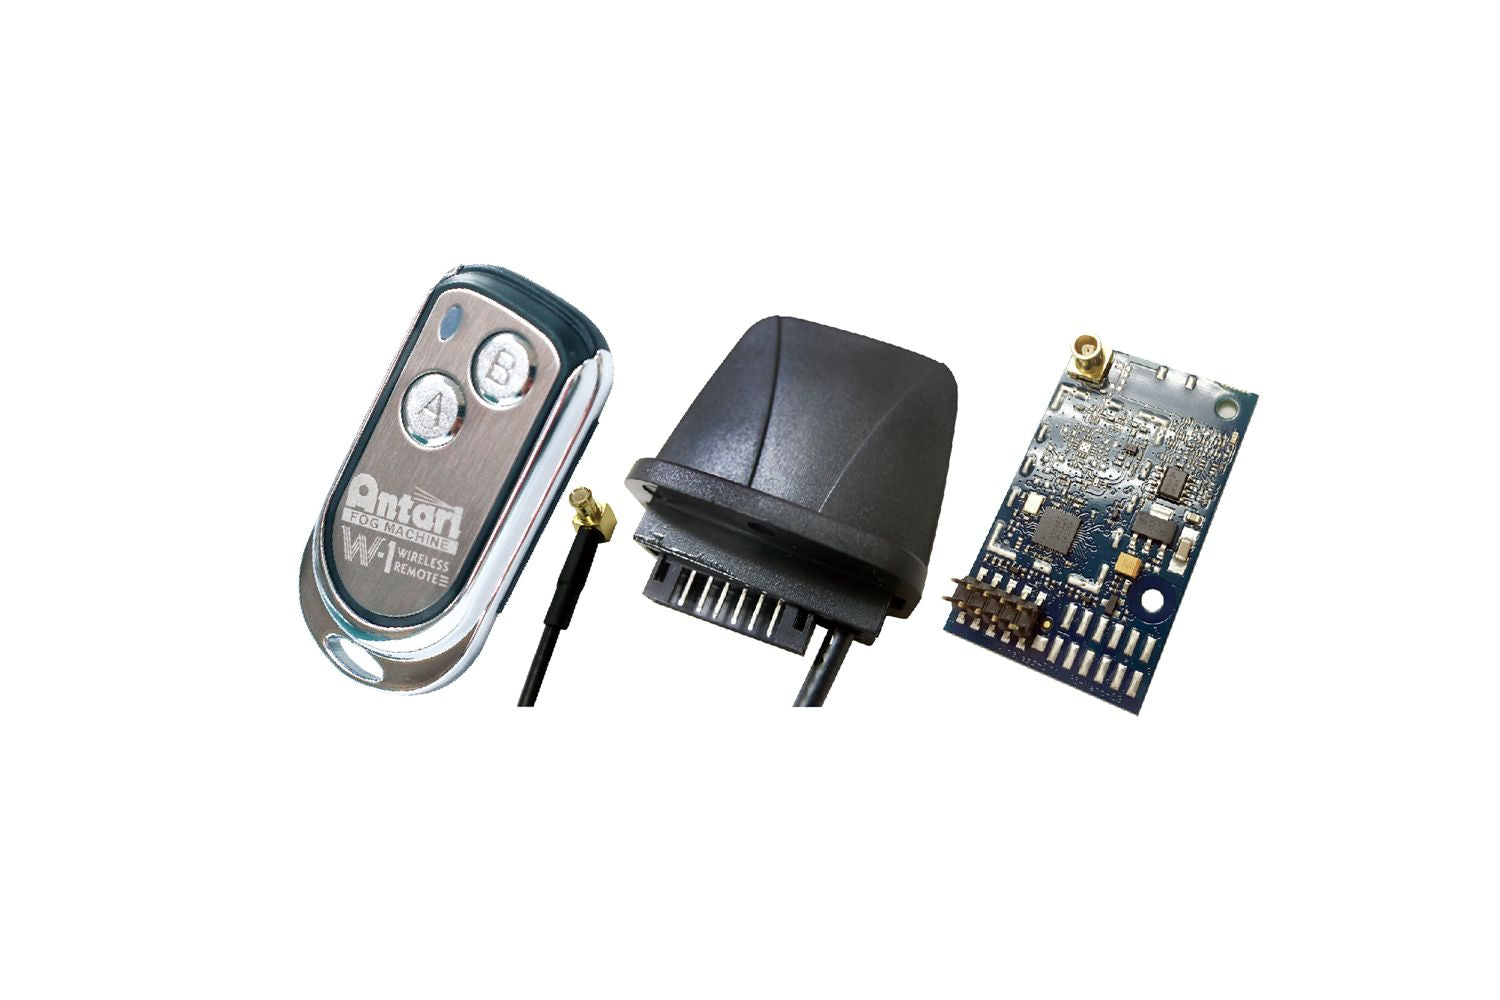 WTR100 - W1 transmitter with W2 receiver with WDMX antenna and WDMXPCBR